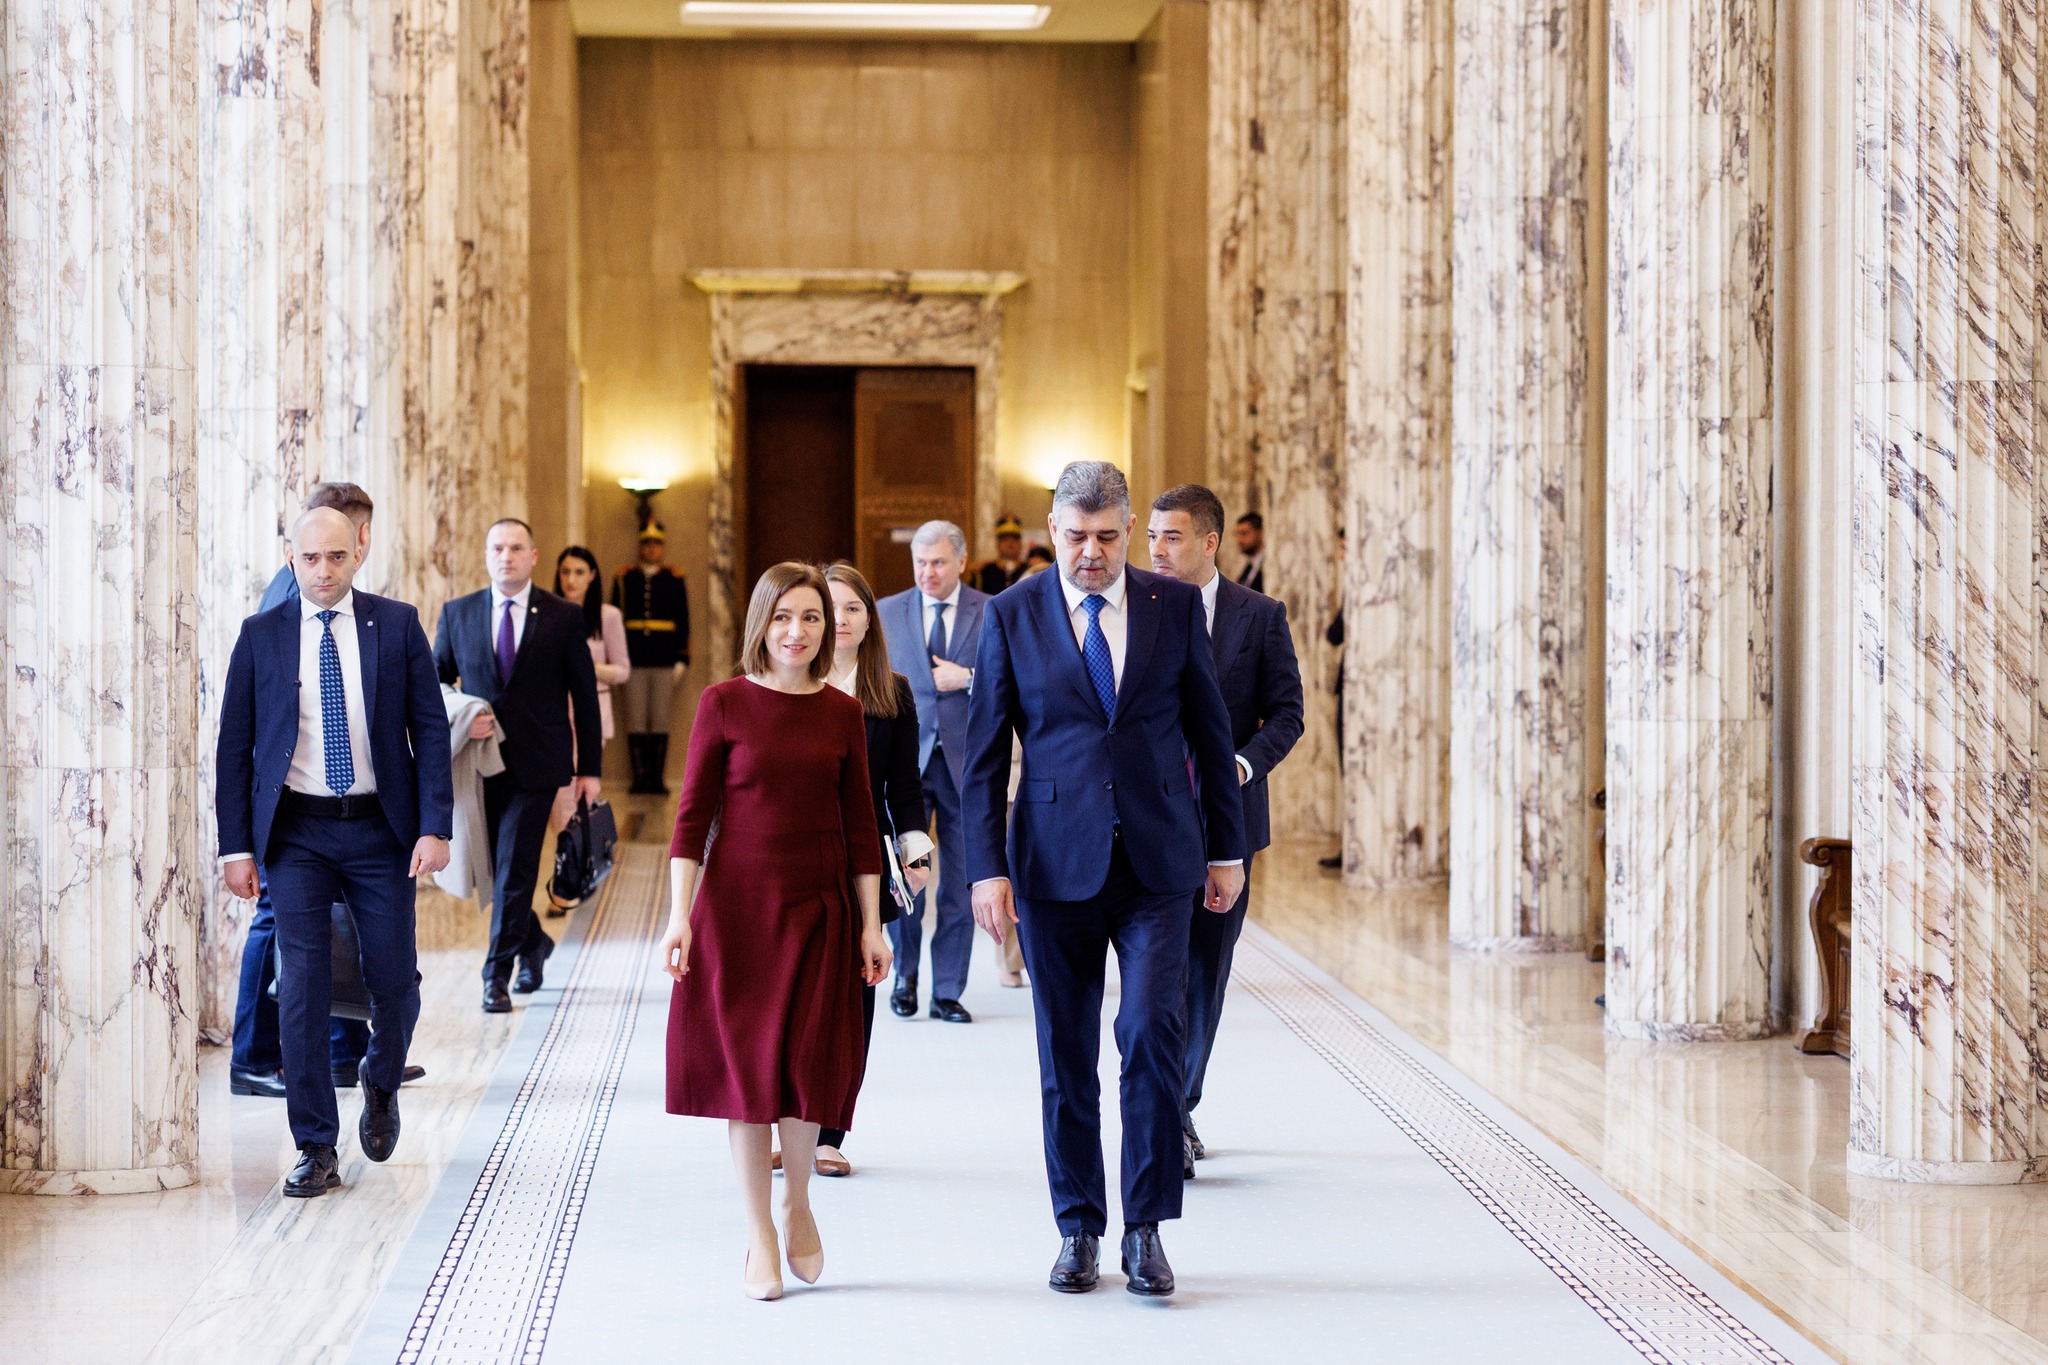 Moldovan president Maia Sandu received by Romanian PM and president ahead of EPP congress